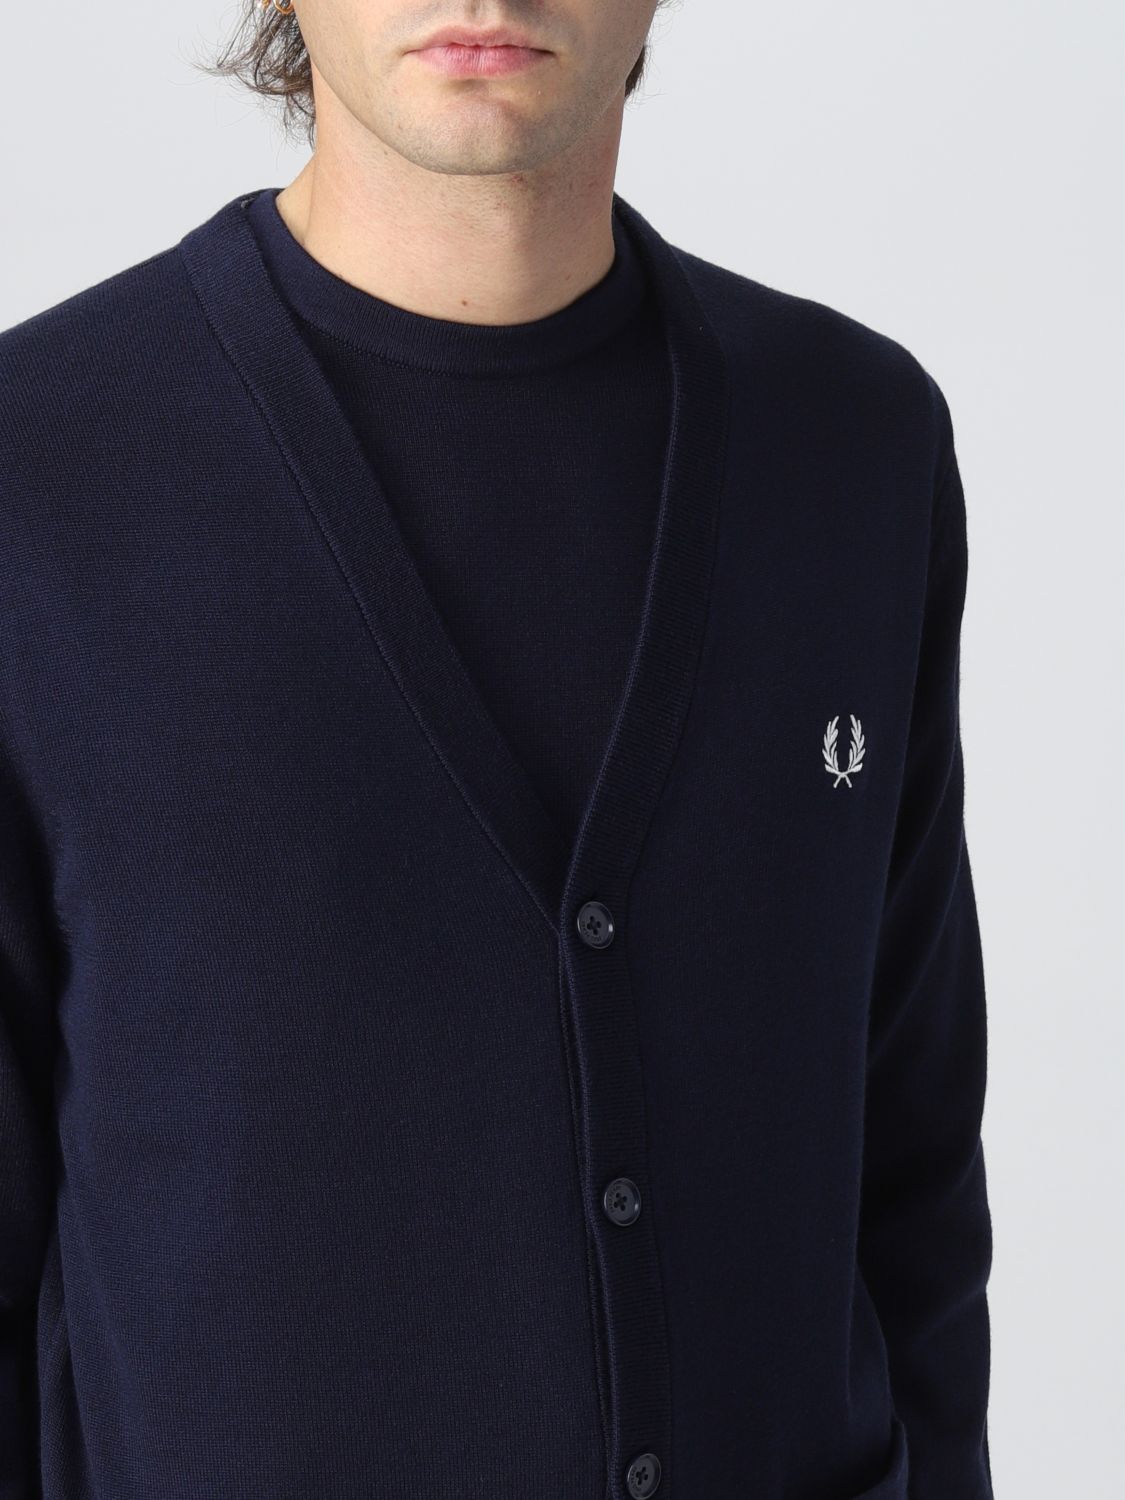 Cardigan Fred Perry: Fred Perry cardigan for man black 4